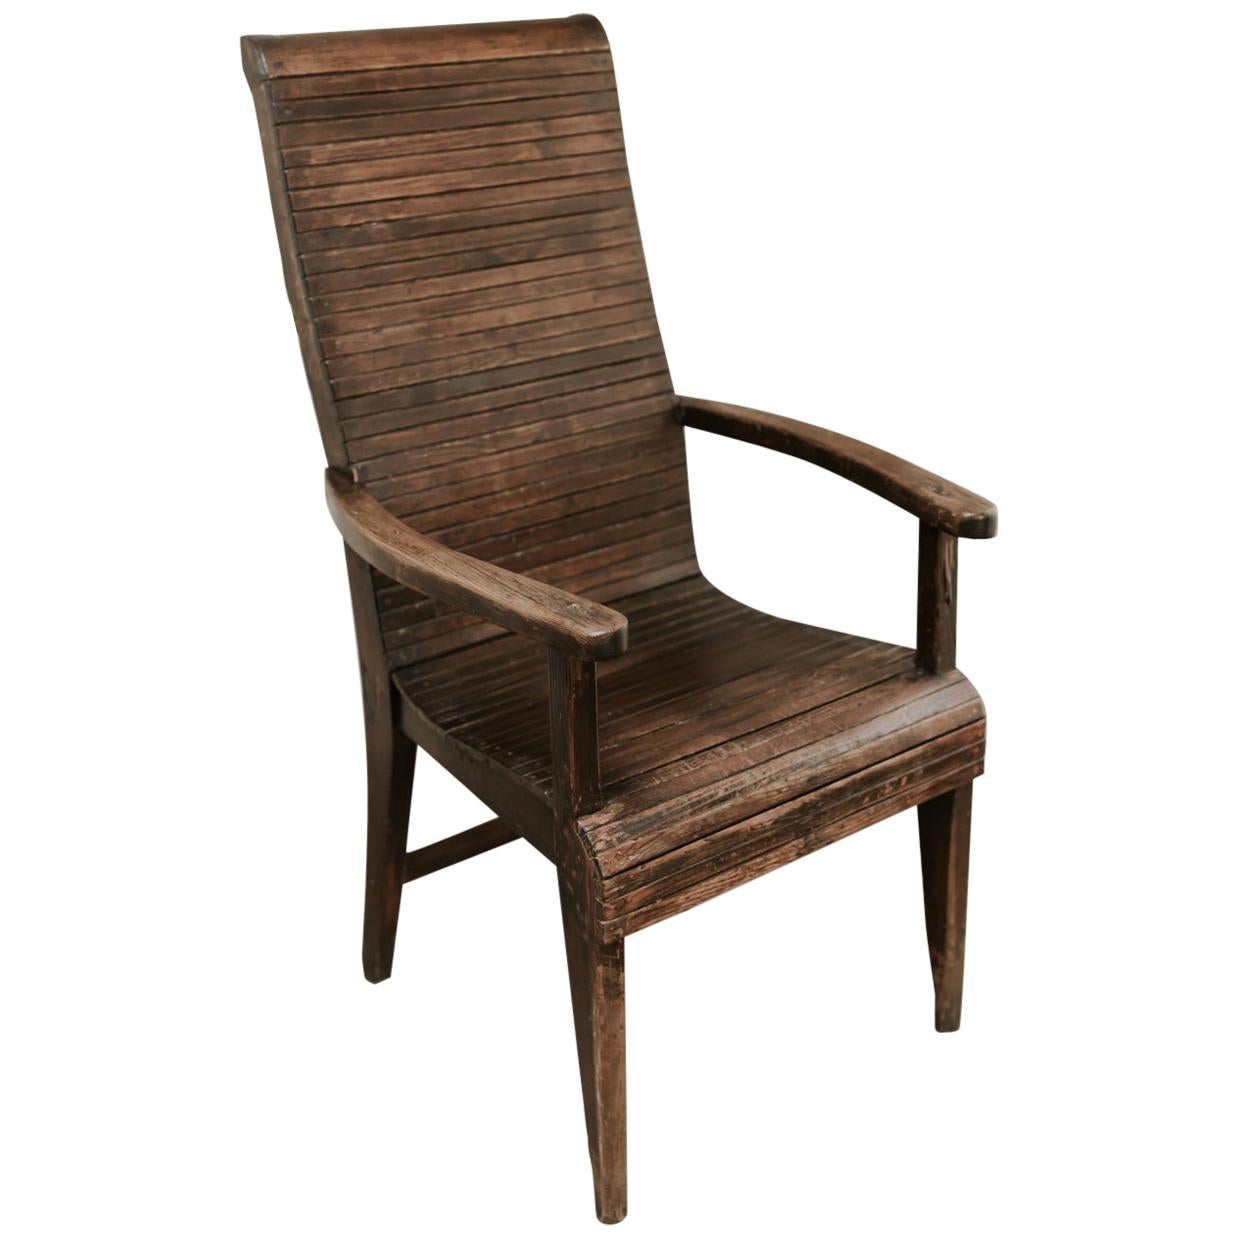 Quirky Highback Wooden Chair